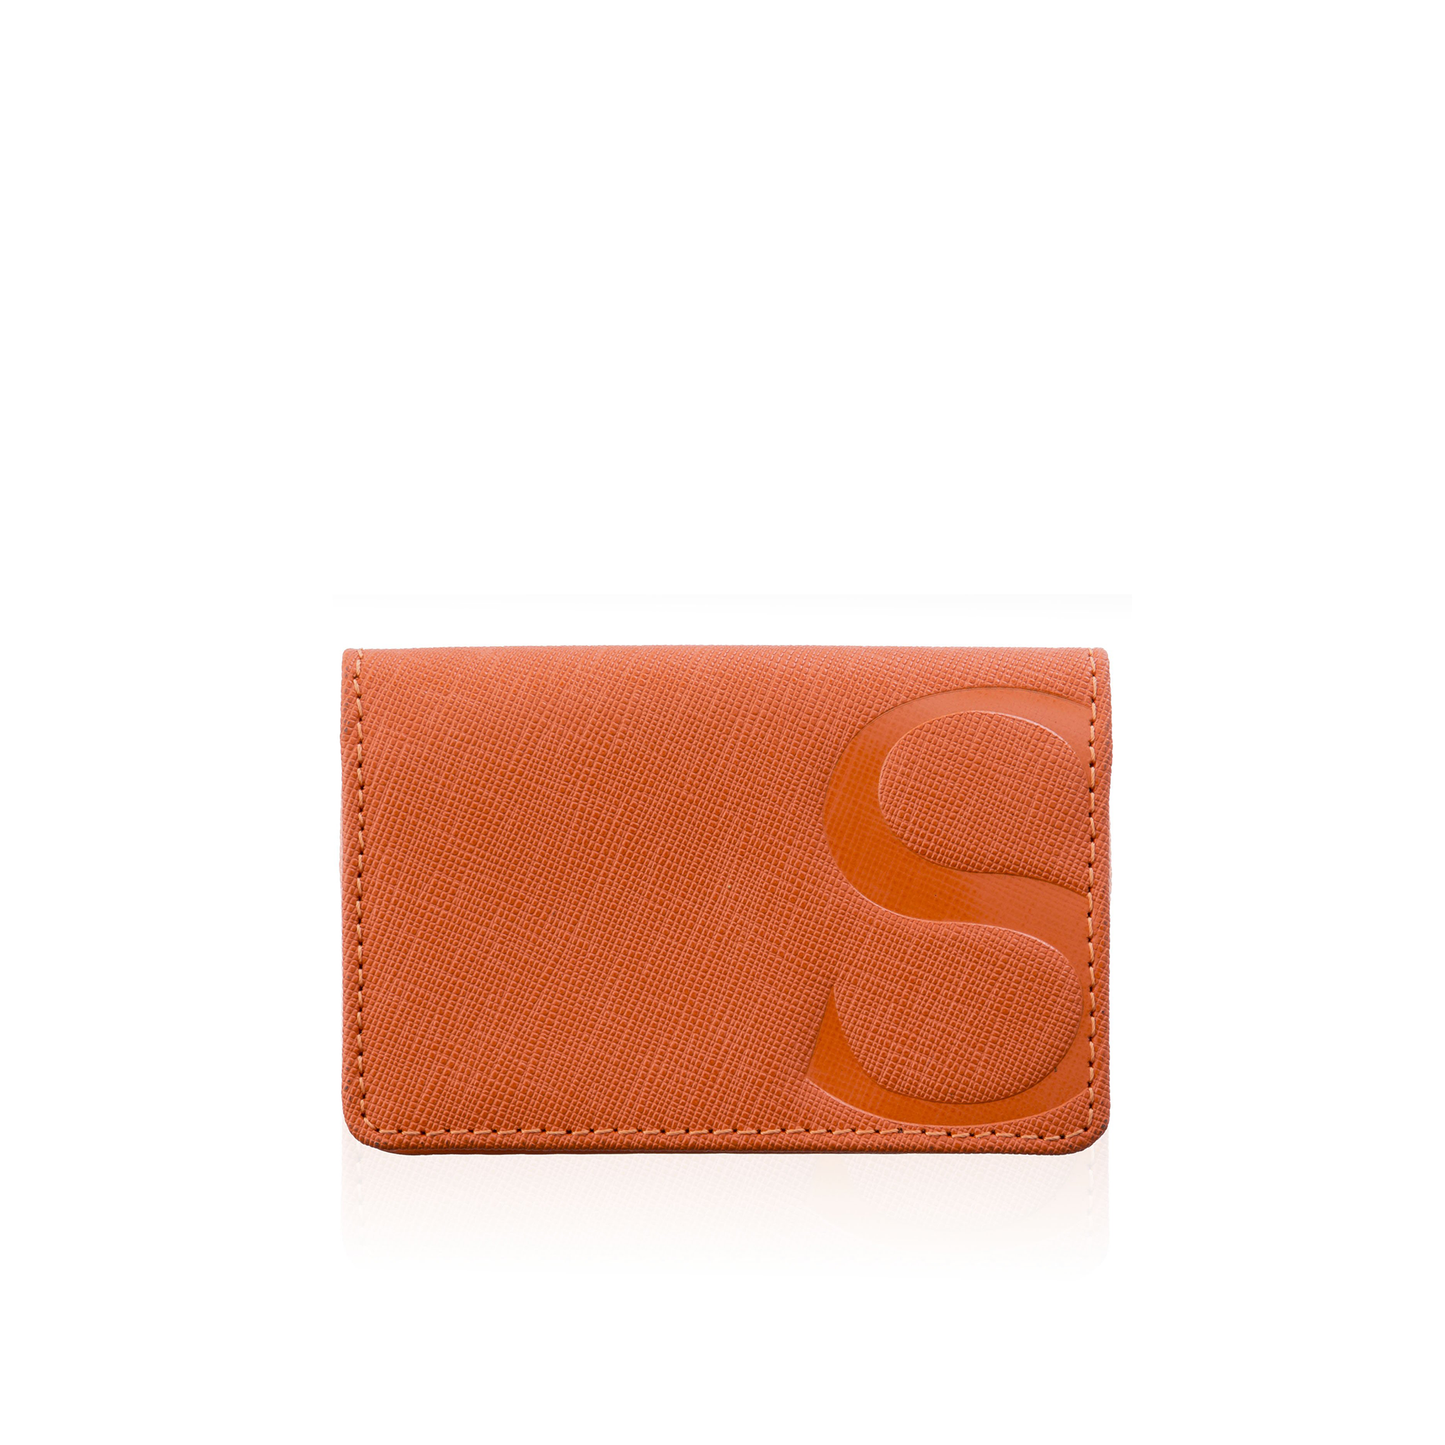 Load image into Gallery viewer, Credit Card Case in Orange Textured Leather
